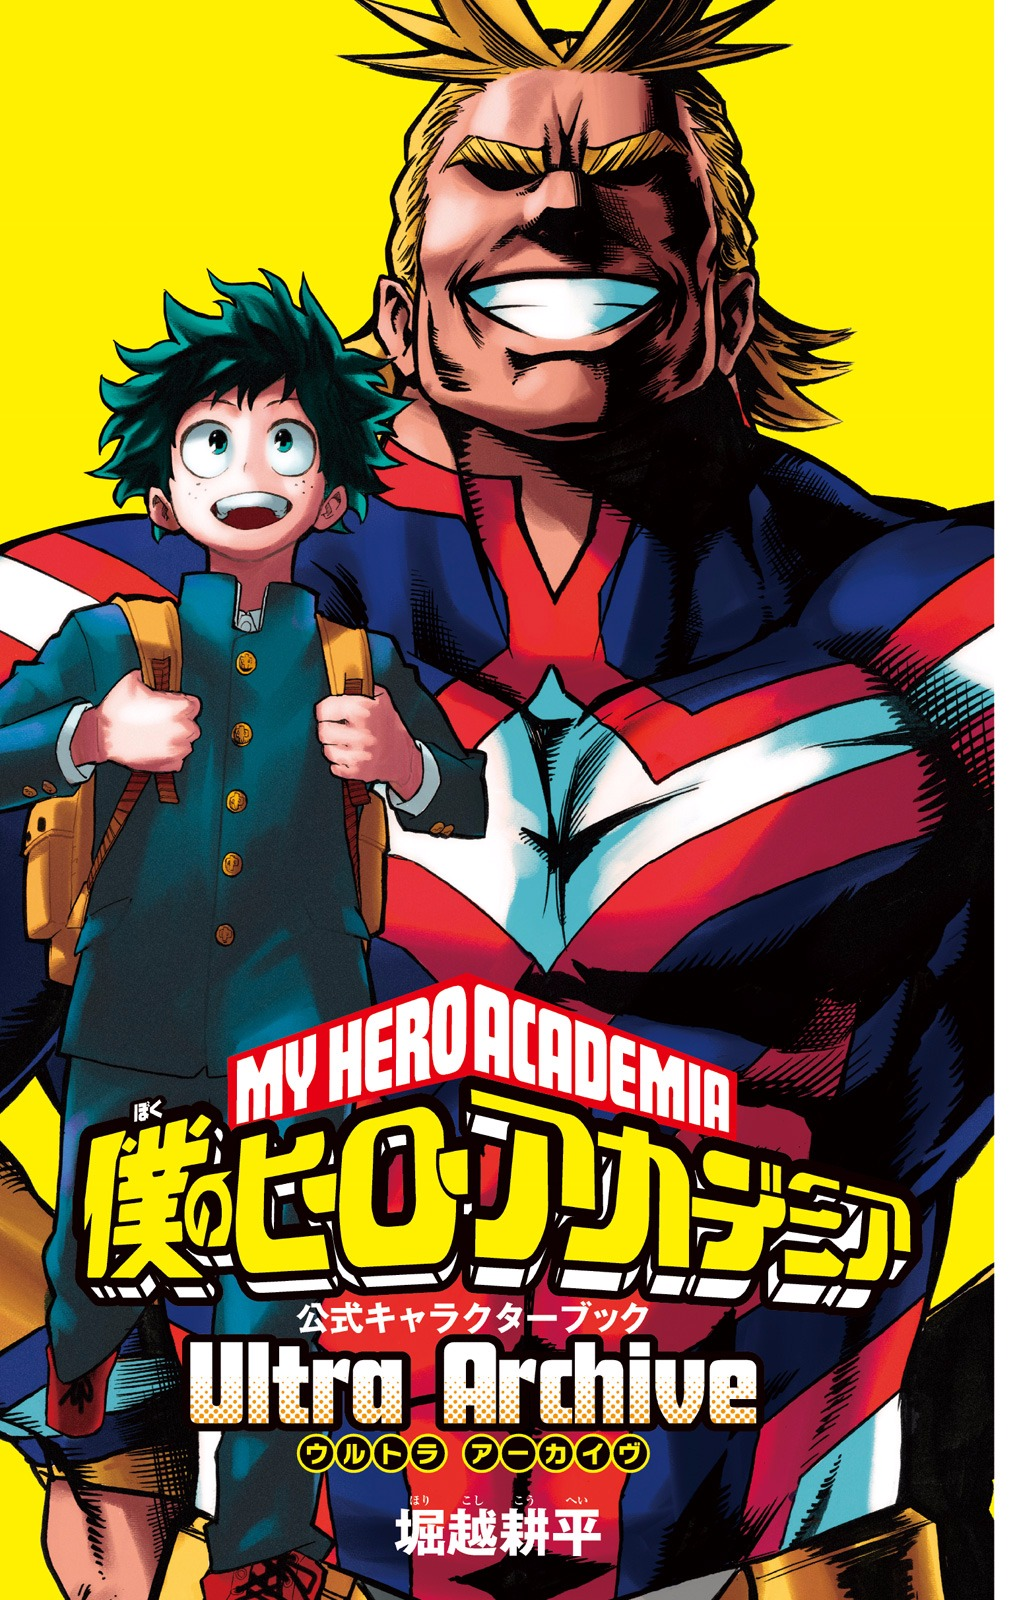 My Hero Academia: Ultra Archive: The Official Character Guide | My